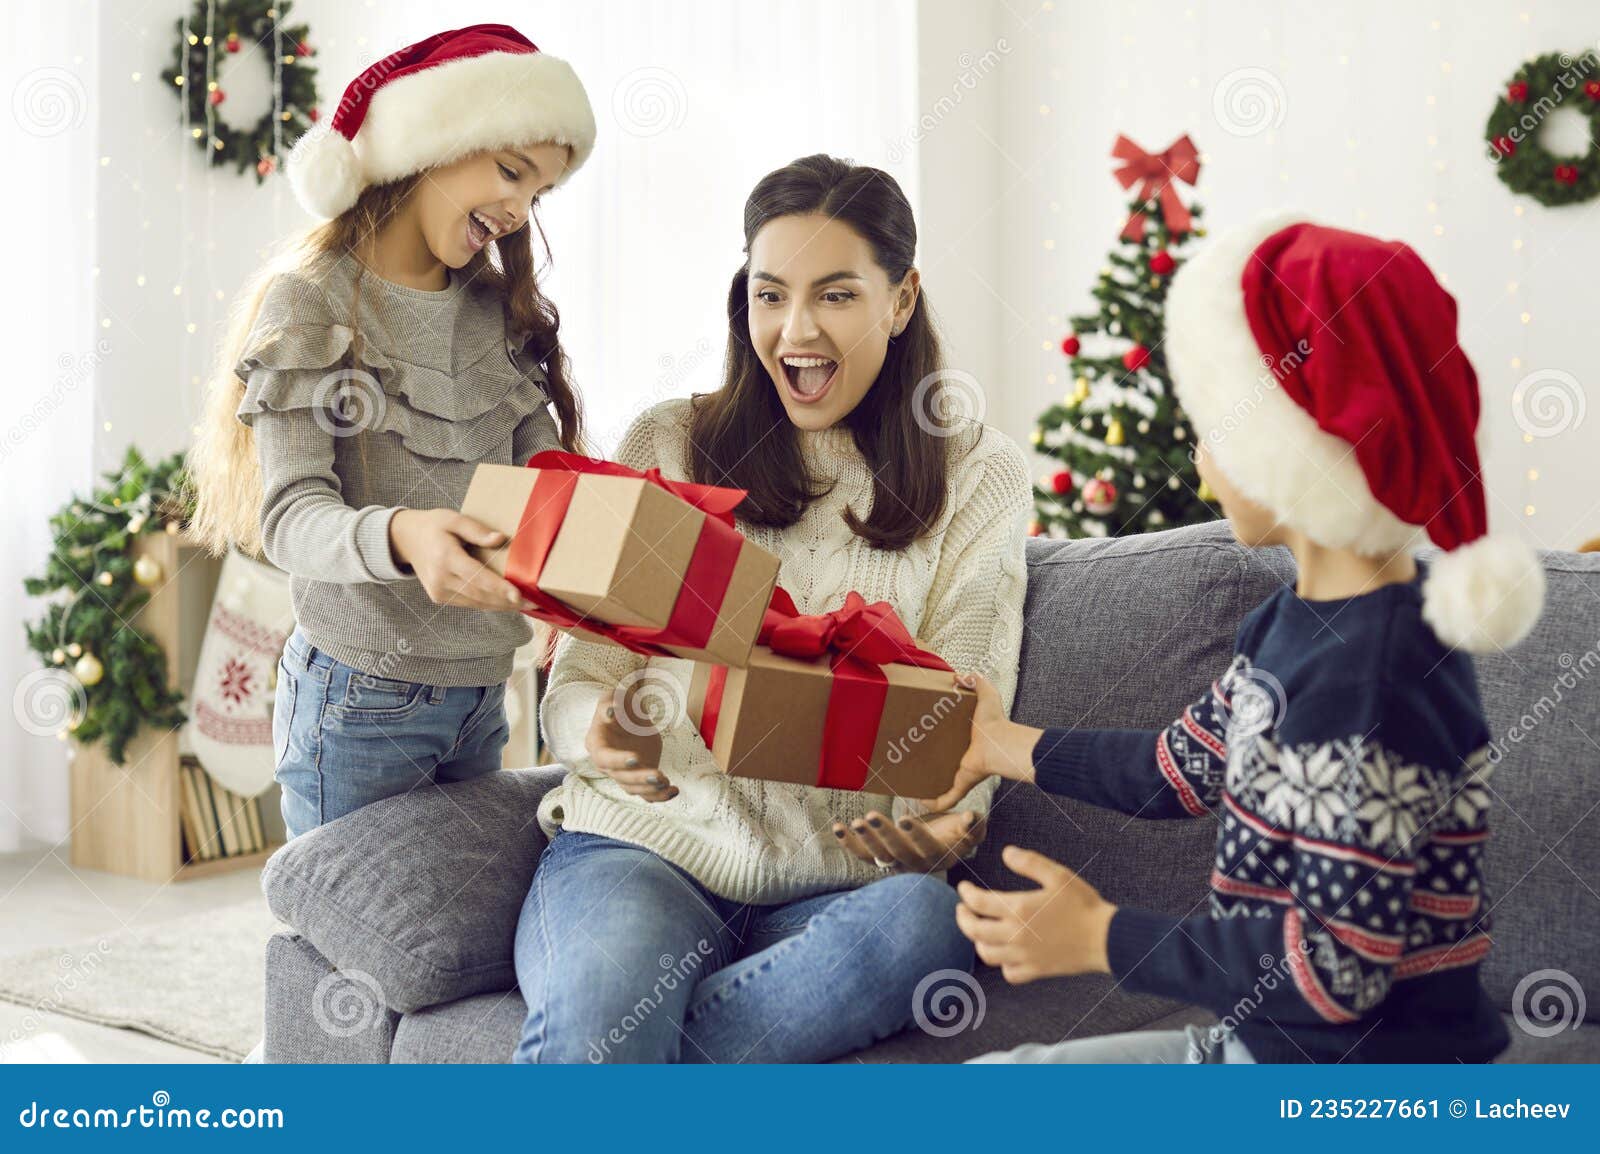 https://thumbs.dreamstime.com/z/little-daughter-son-prepare-xmas-surprise-their-mother-christmas-day-happy-family-enjoying-gift-giving-christmas-235227661.jpg